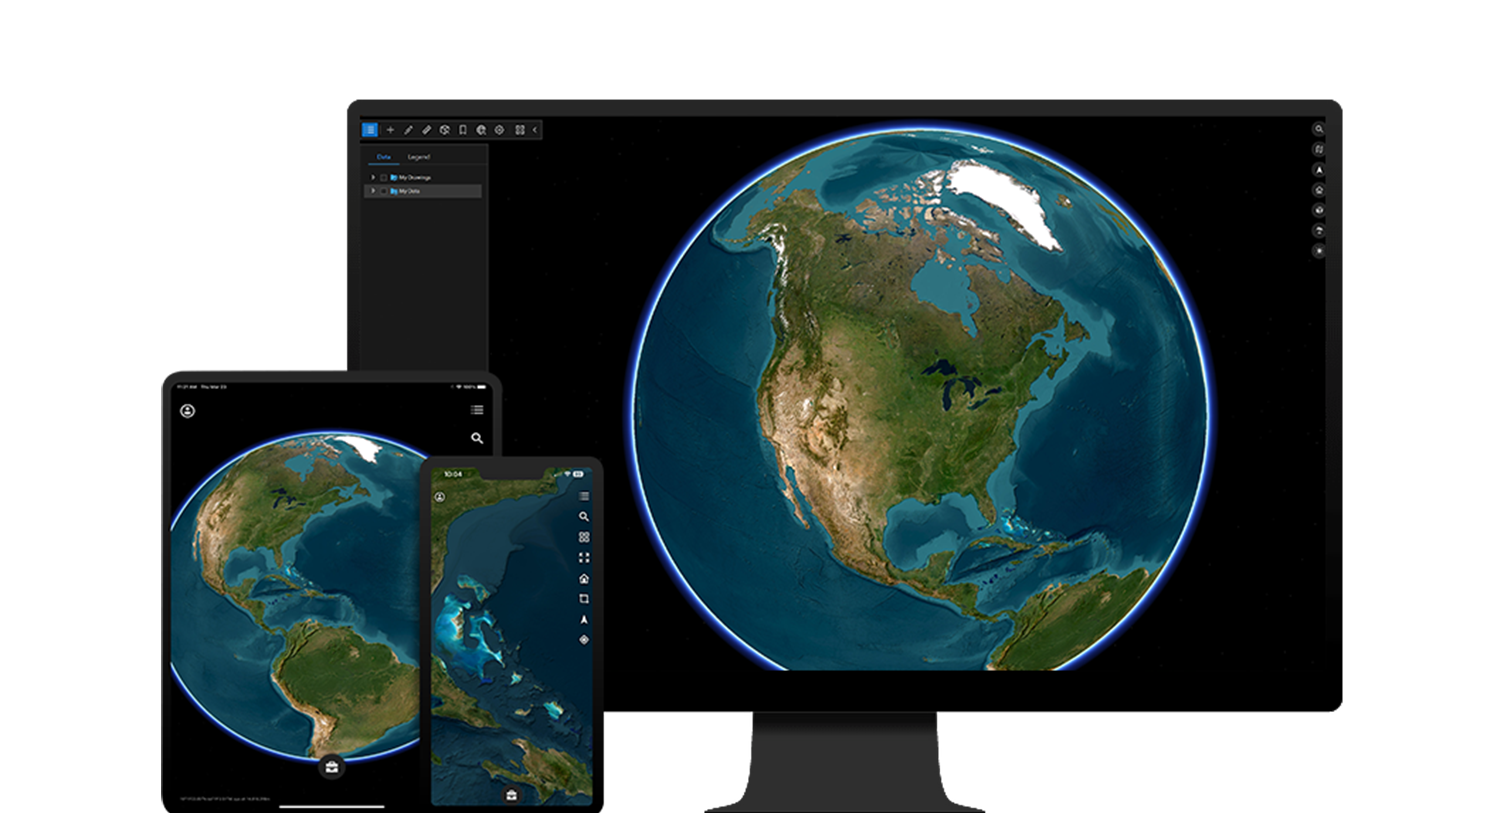 Desktop, tablet, and mobile device showing an image of earth from space representing the ArcGIS Earth user interface 